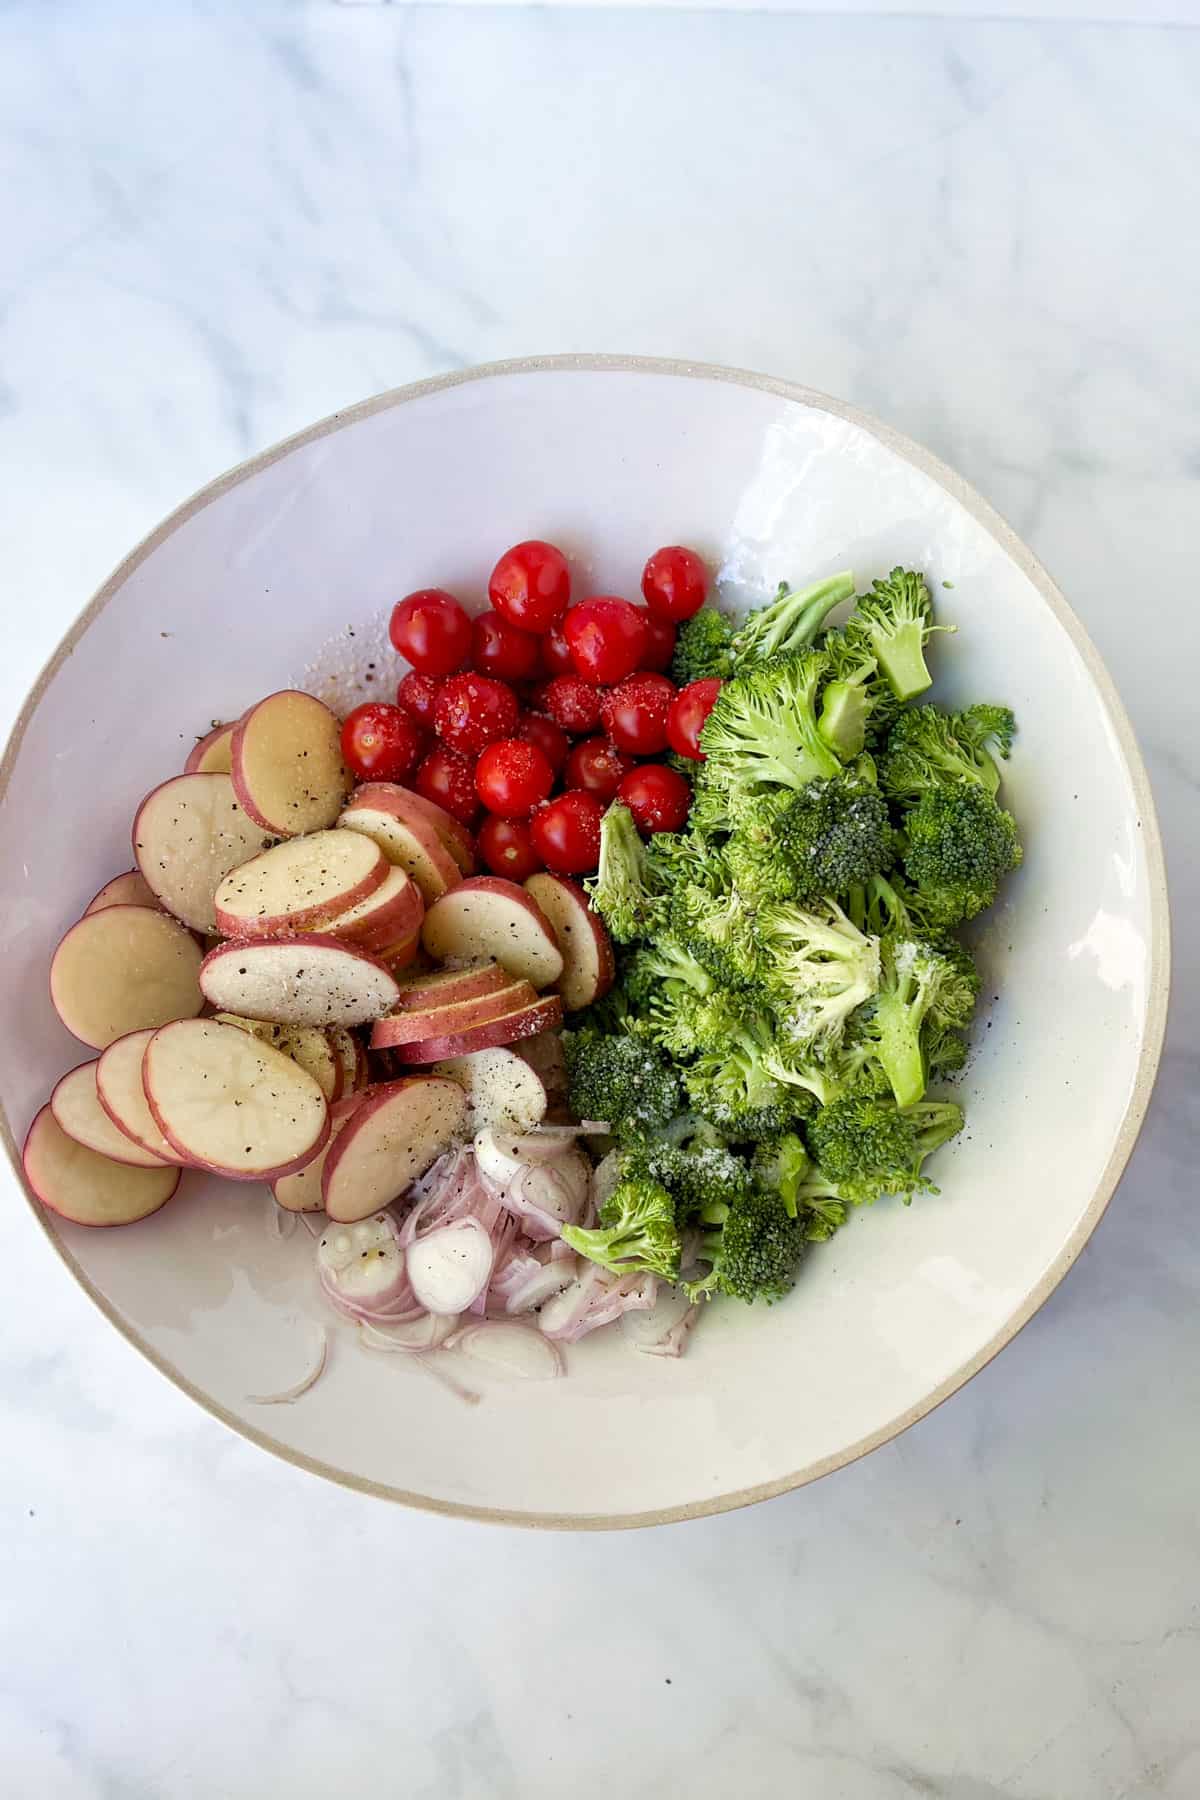 Mixing bowl filled with individual piles of cherry tomatoes, sliced poatoes, broccoli florets and sliced shallots